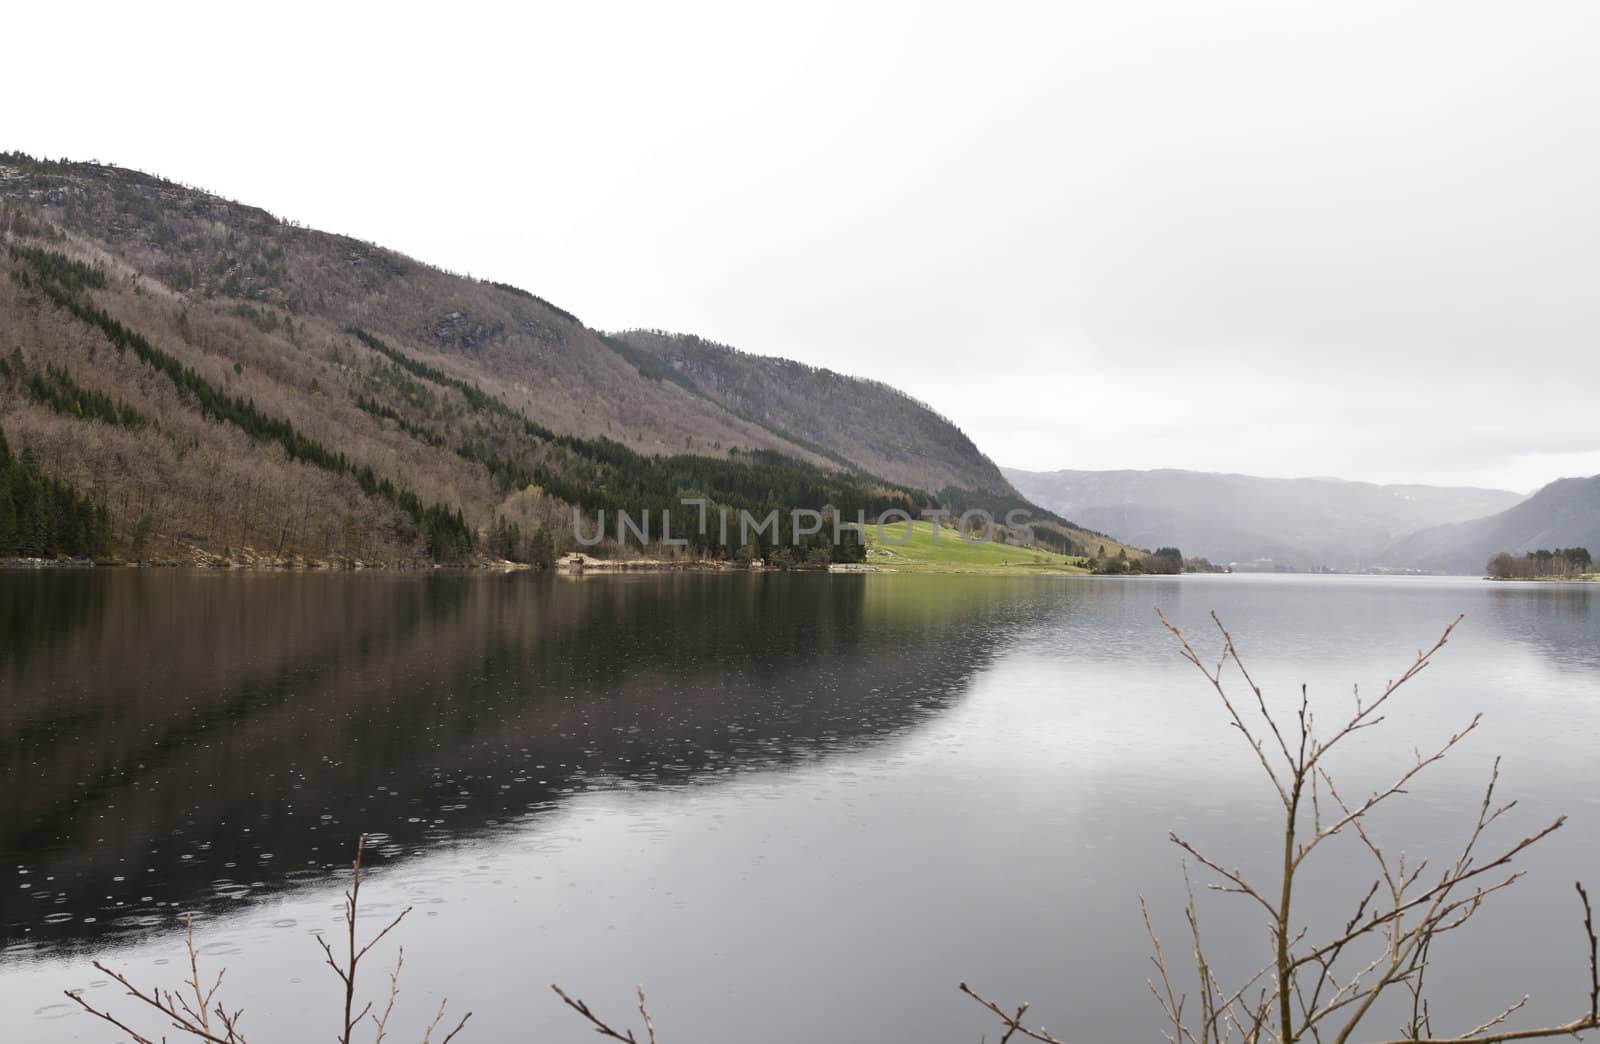 fjord in norway with raindrops falling in water